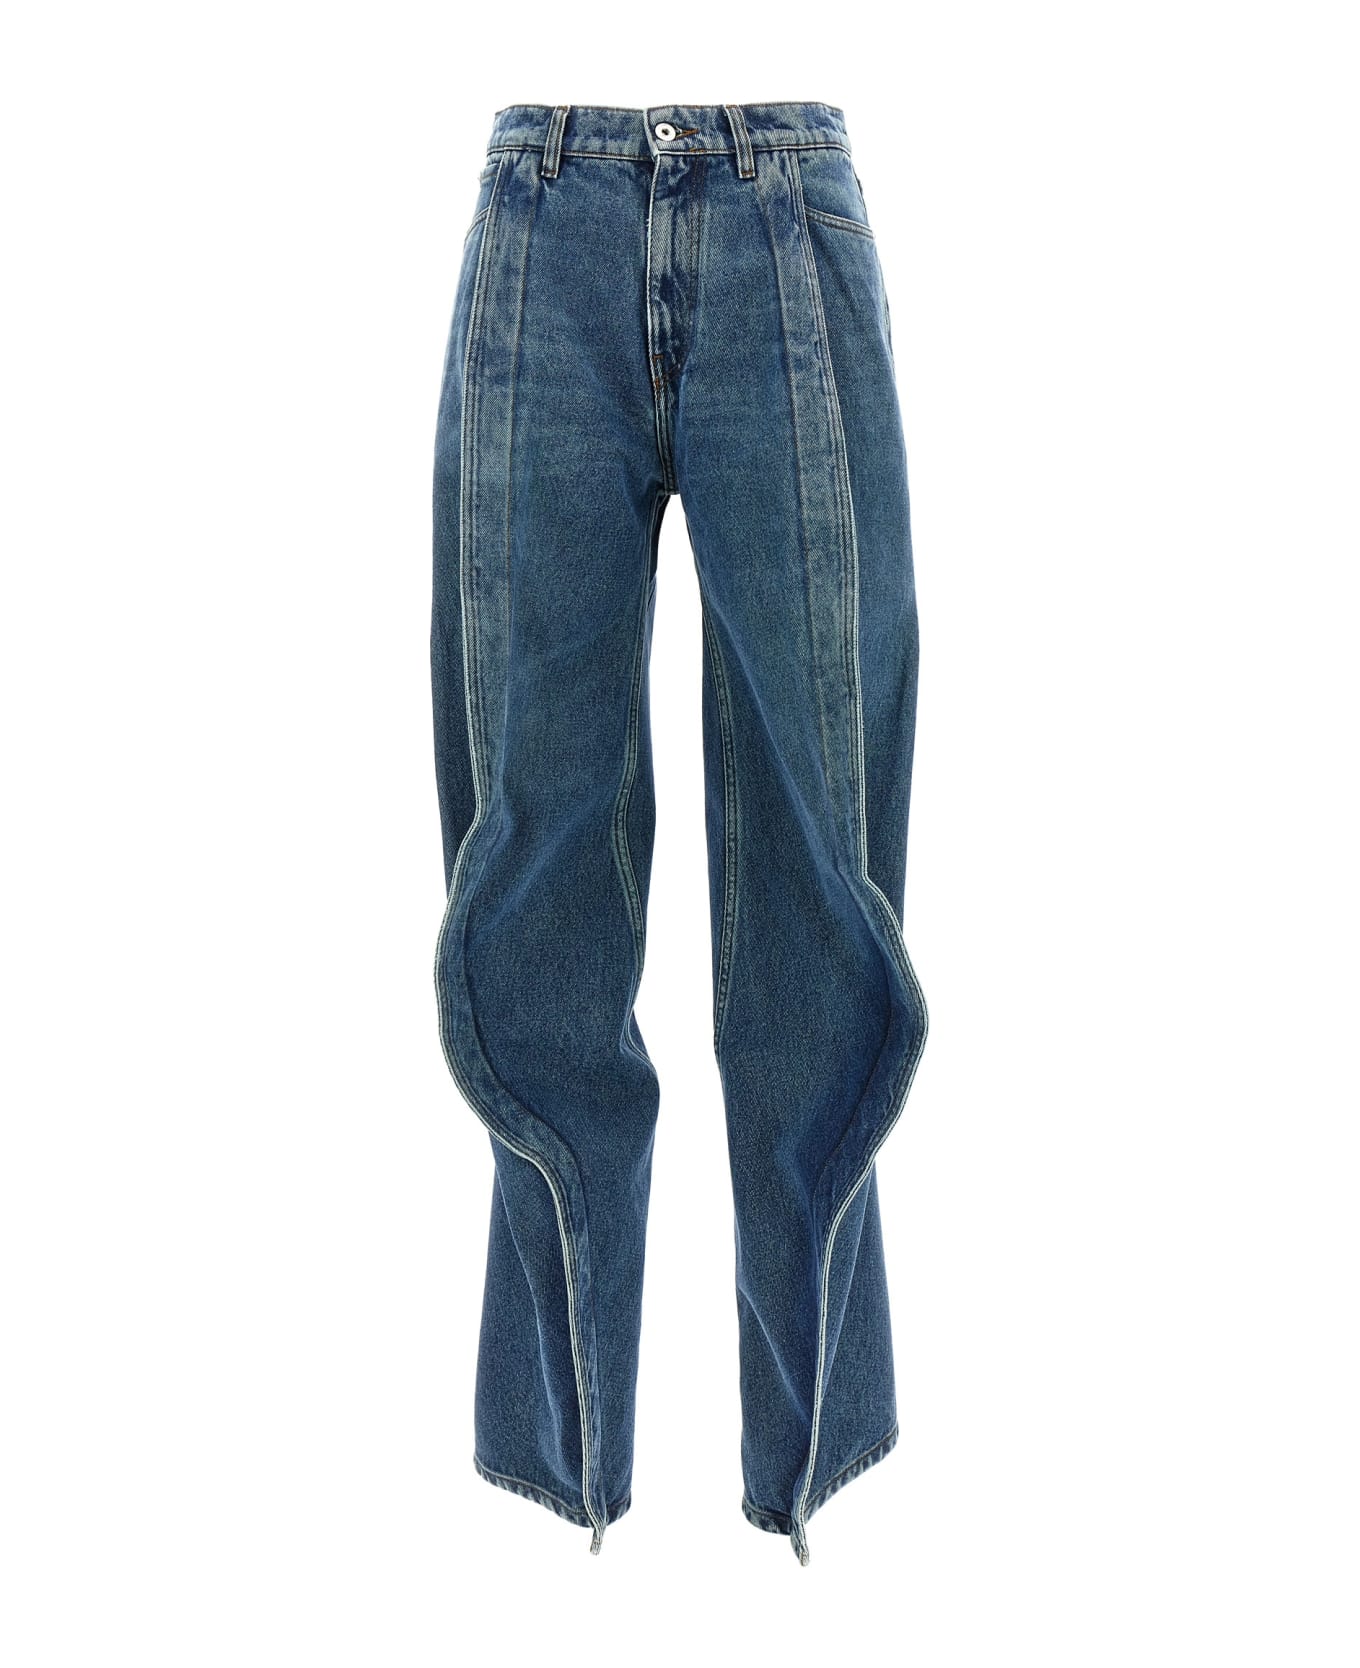 Y/Project 'evergreen Banana Jeans' Jeans - Blue デニム